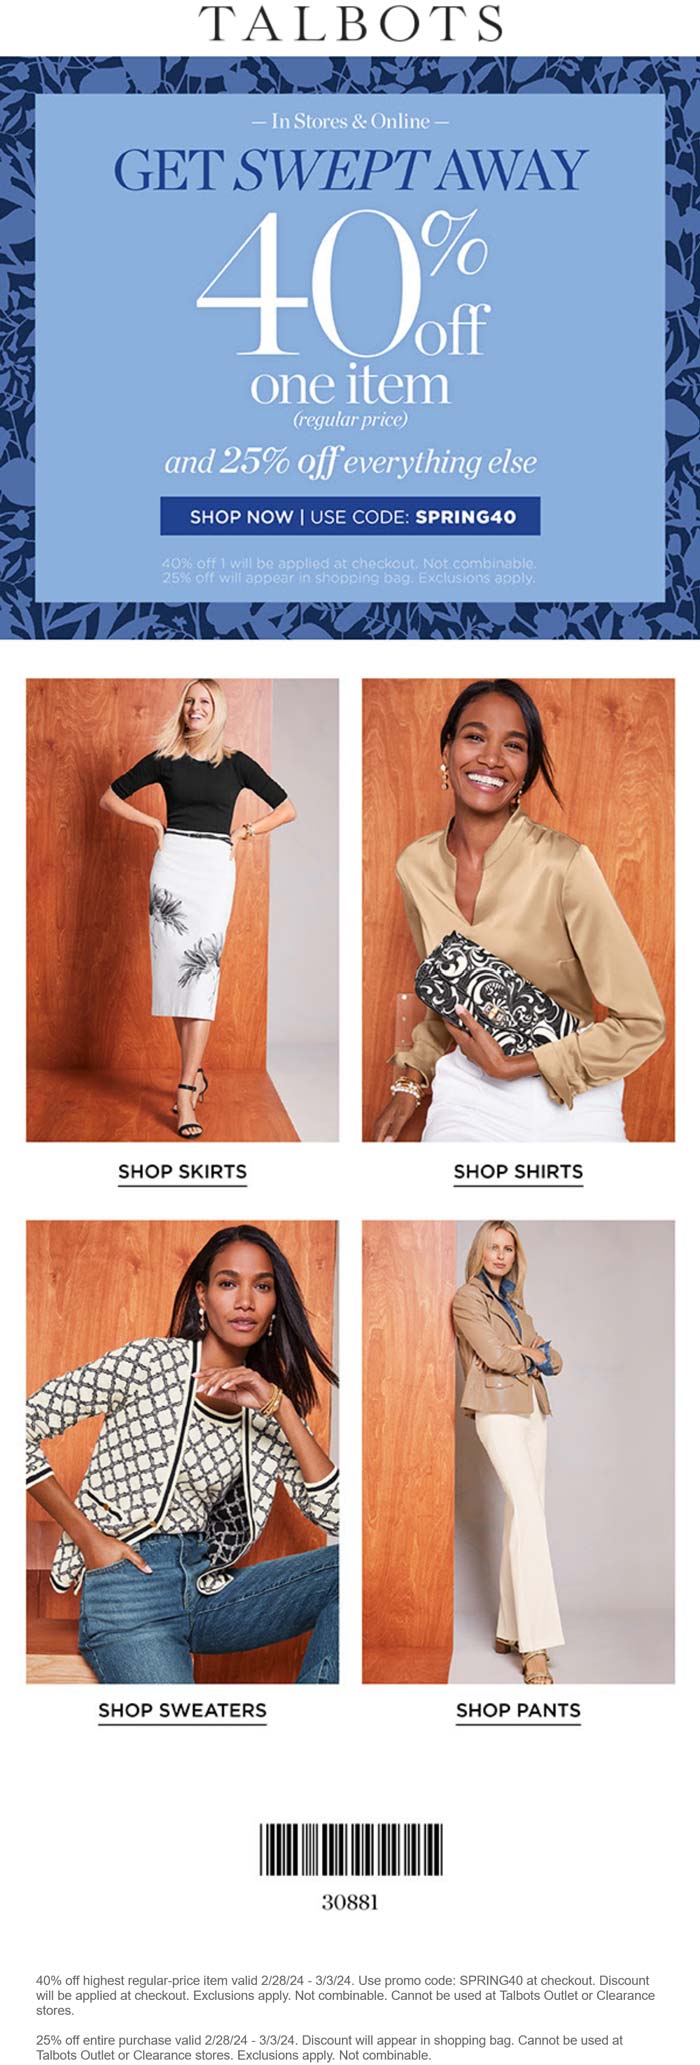 Talbots stores Coupon  25% off everything + 40% off a single item at Talbots, or online via promo code SPRING40 #talbots 